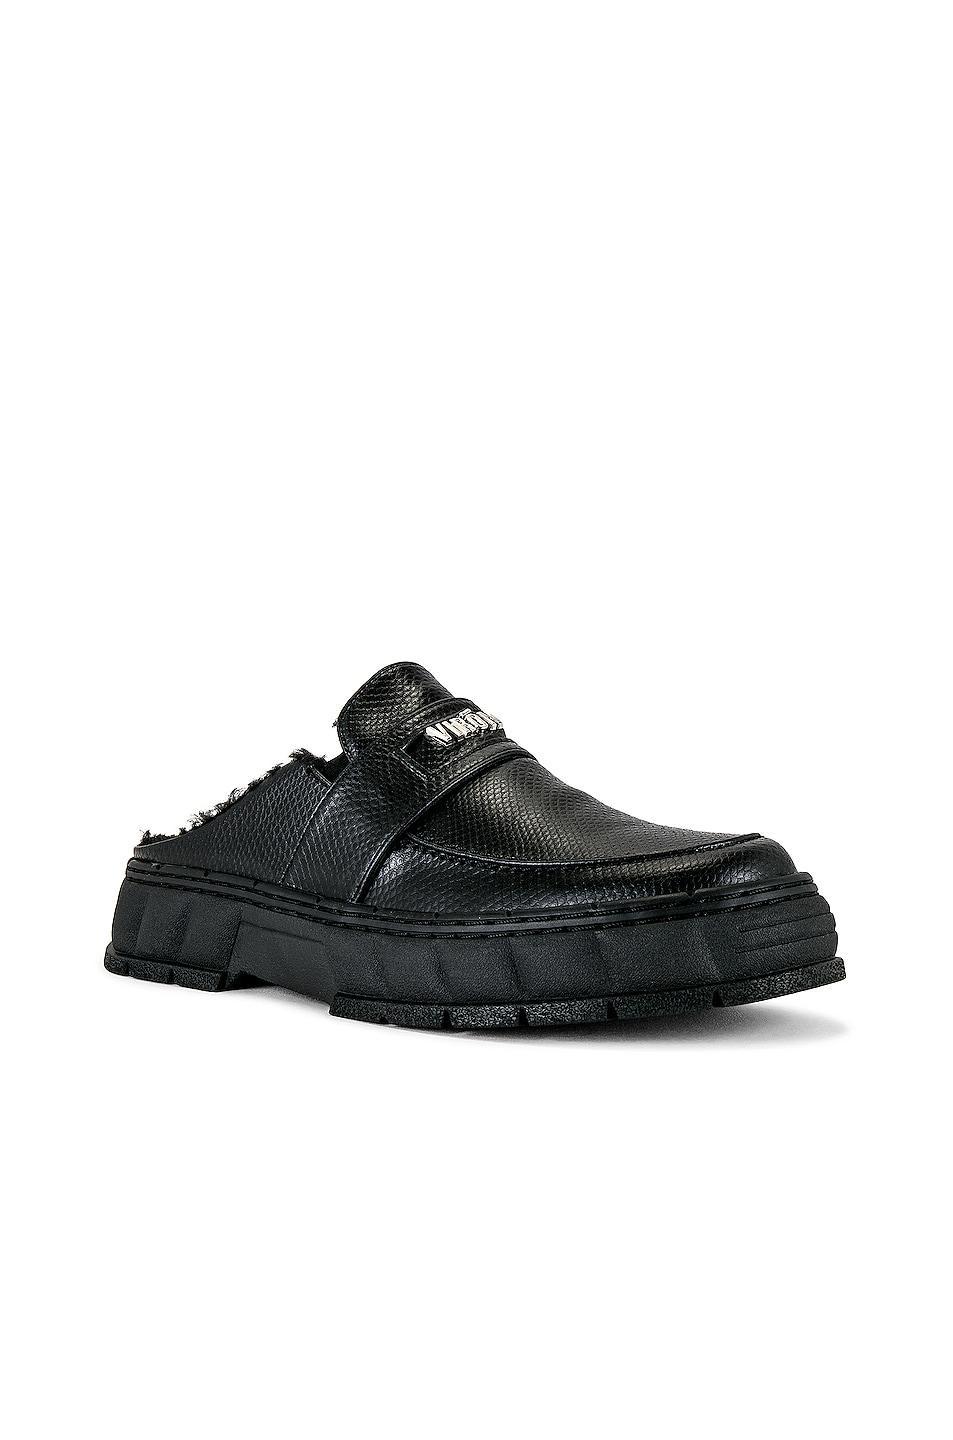 Viron Loafer in Black Product Image